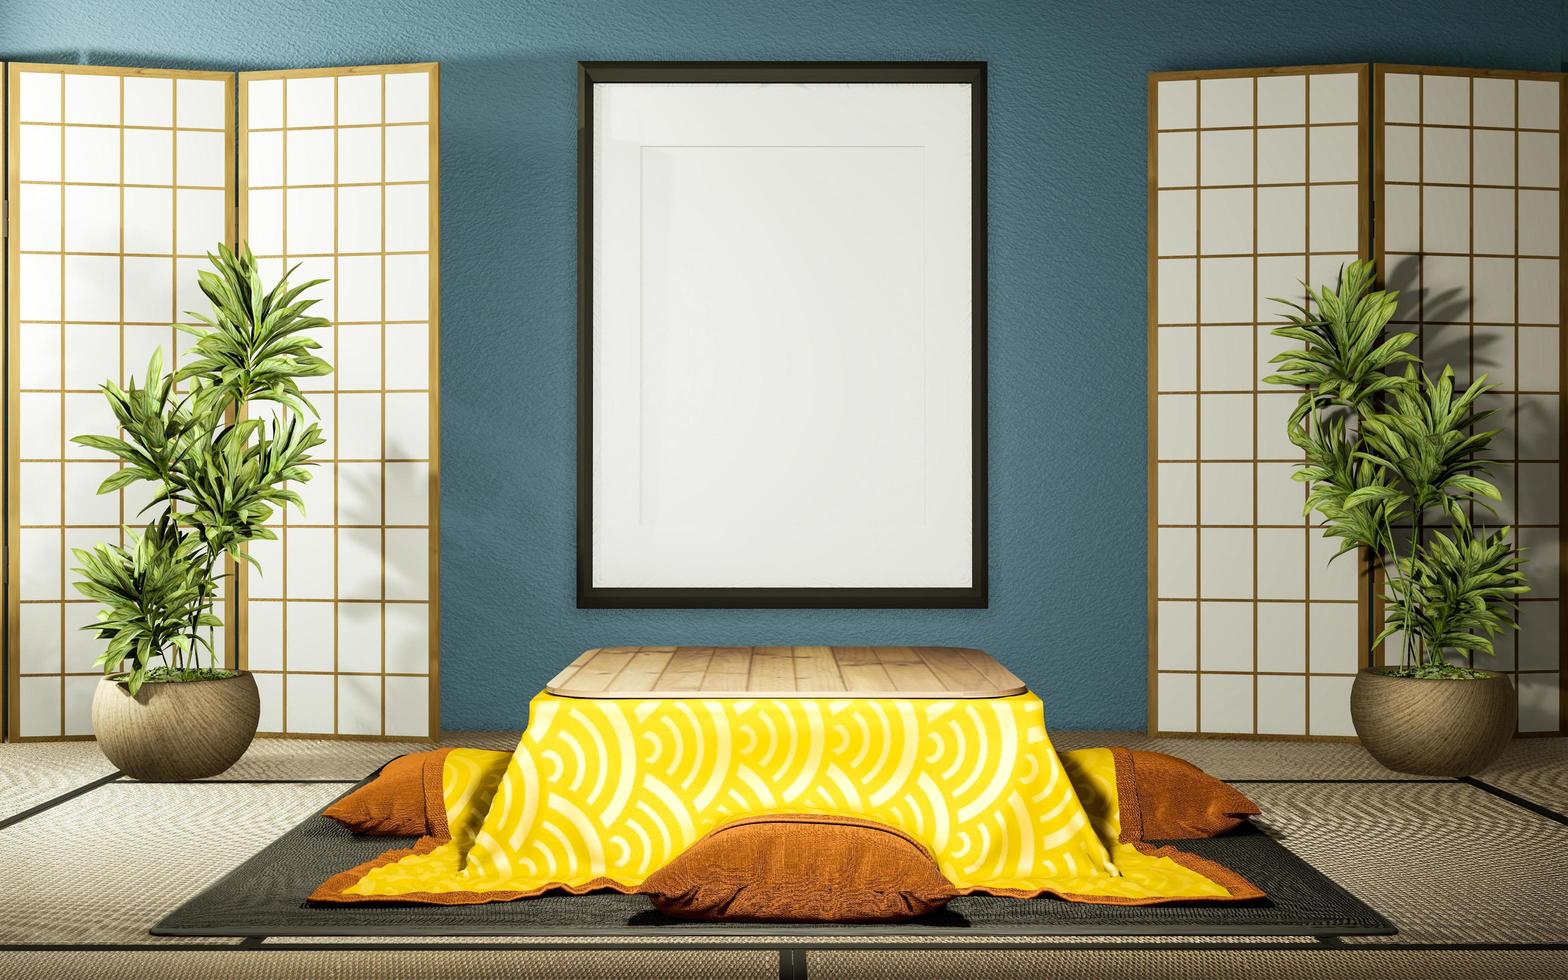 Japanese partition paper wooden design and kotatsu low table on mint living room tatami floor.3D rendering photo